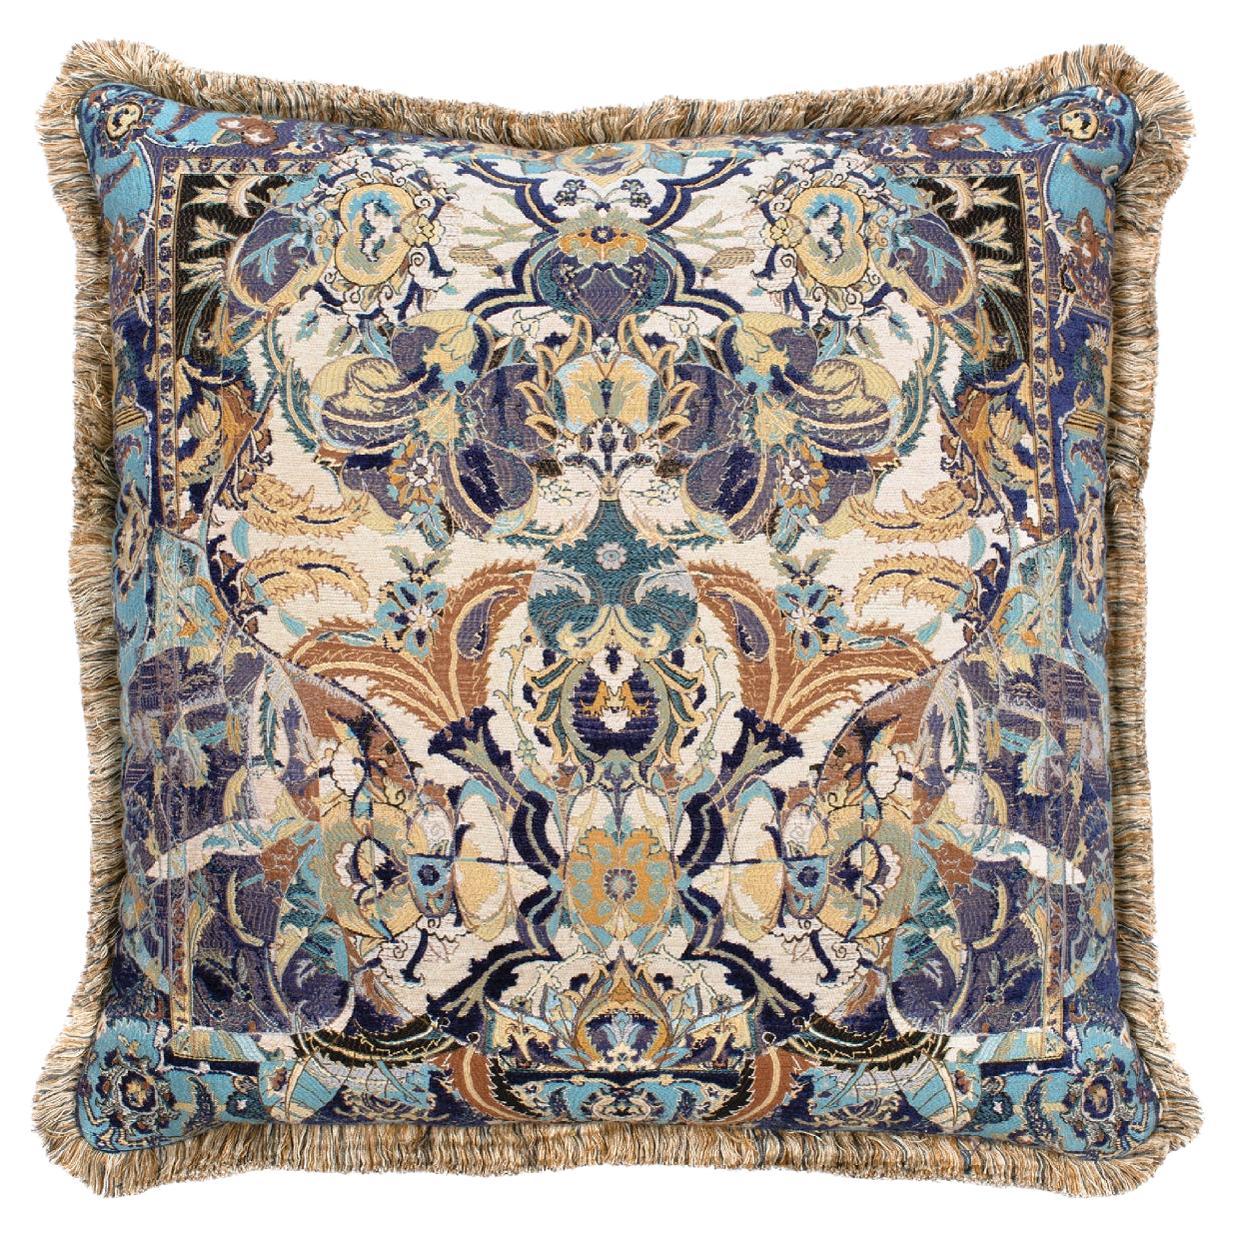 Blue 17th Century Modern Skull Cushion with Gold Fringe by Knots Rugs